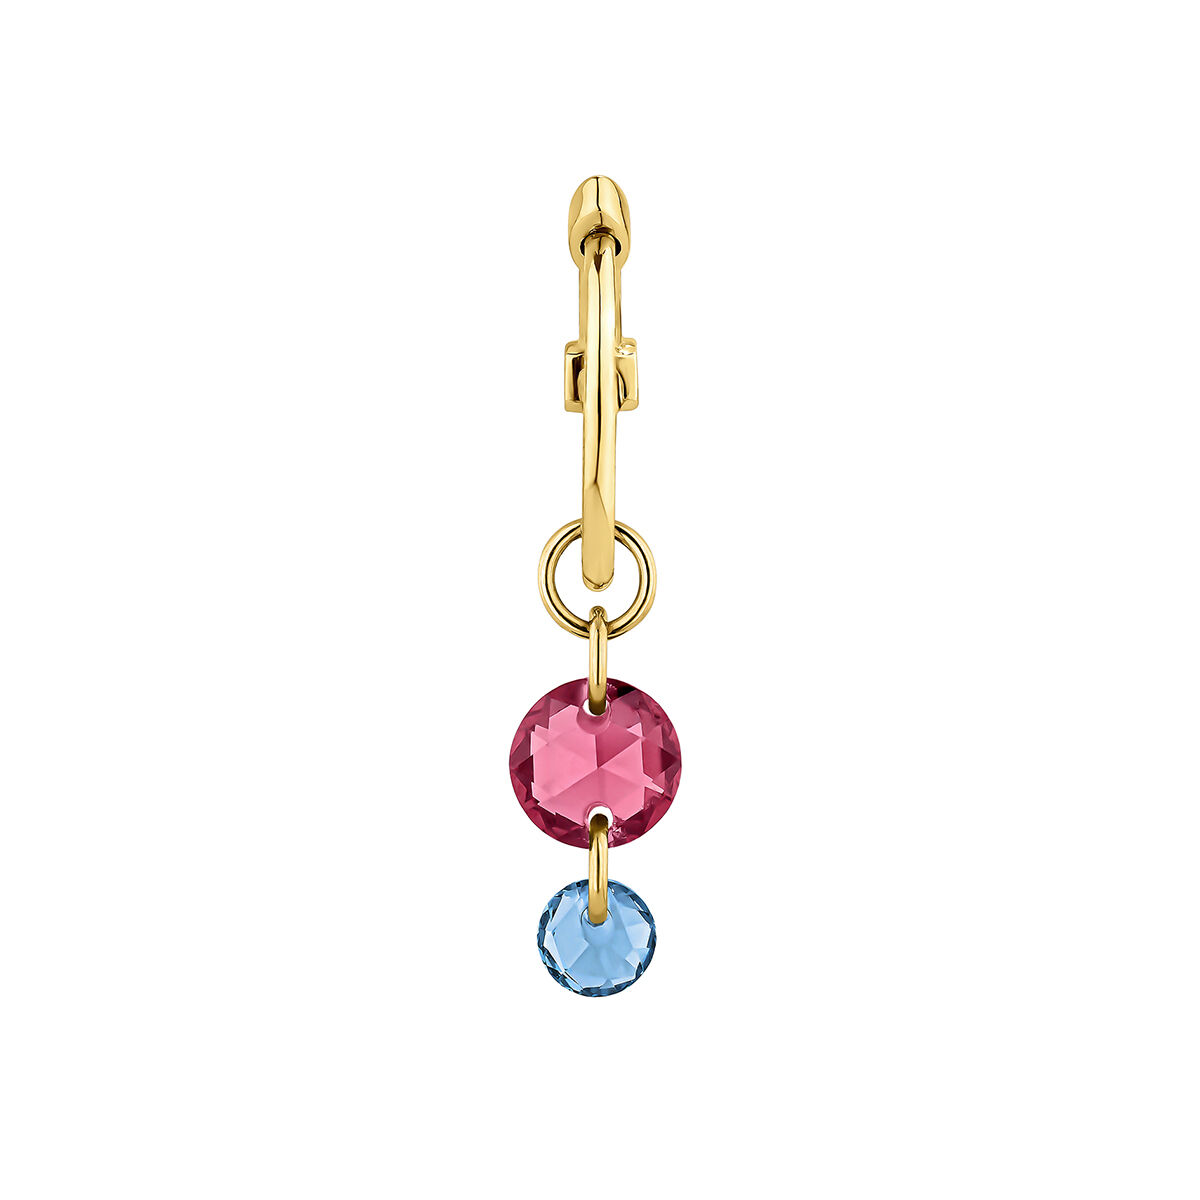 9k gold hoop earring with a rhodolite pendant , J04767-02-RO-LB-H, mainproduct